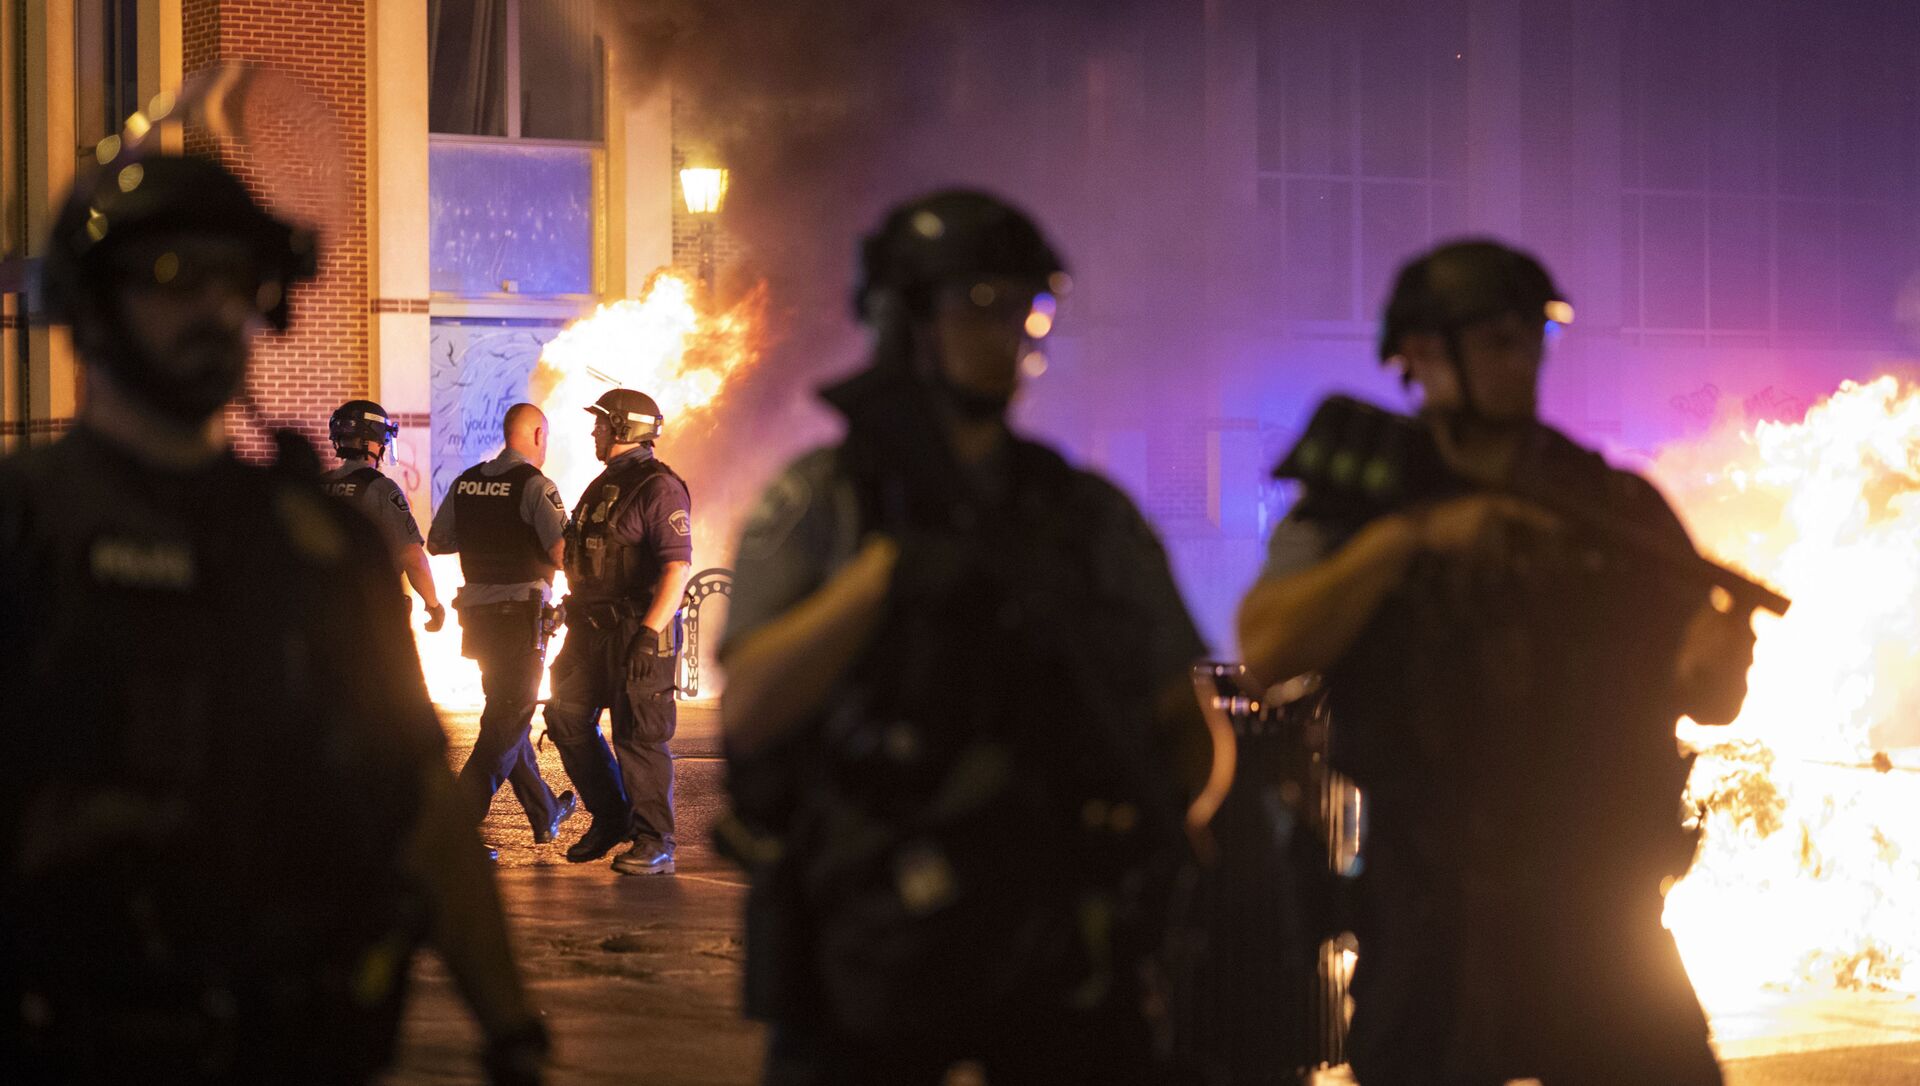 Police stand guard after protesters set fire to dumpsters after a vigil was held for Winston Boogie Smith Jr. early on Saturday, June 5, 2021.  - Sputnik International, 1920, 05.06.2021